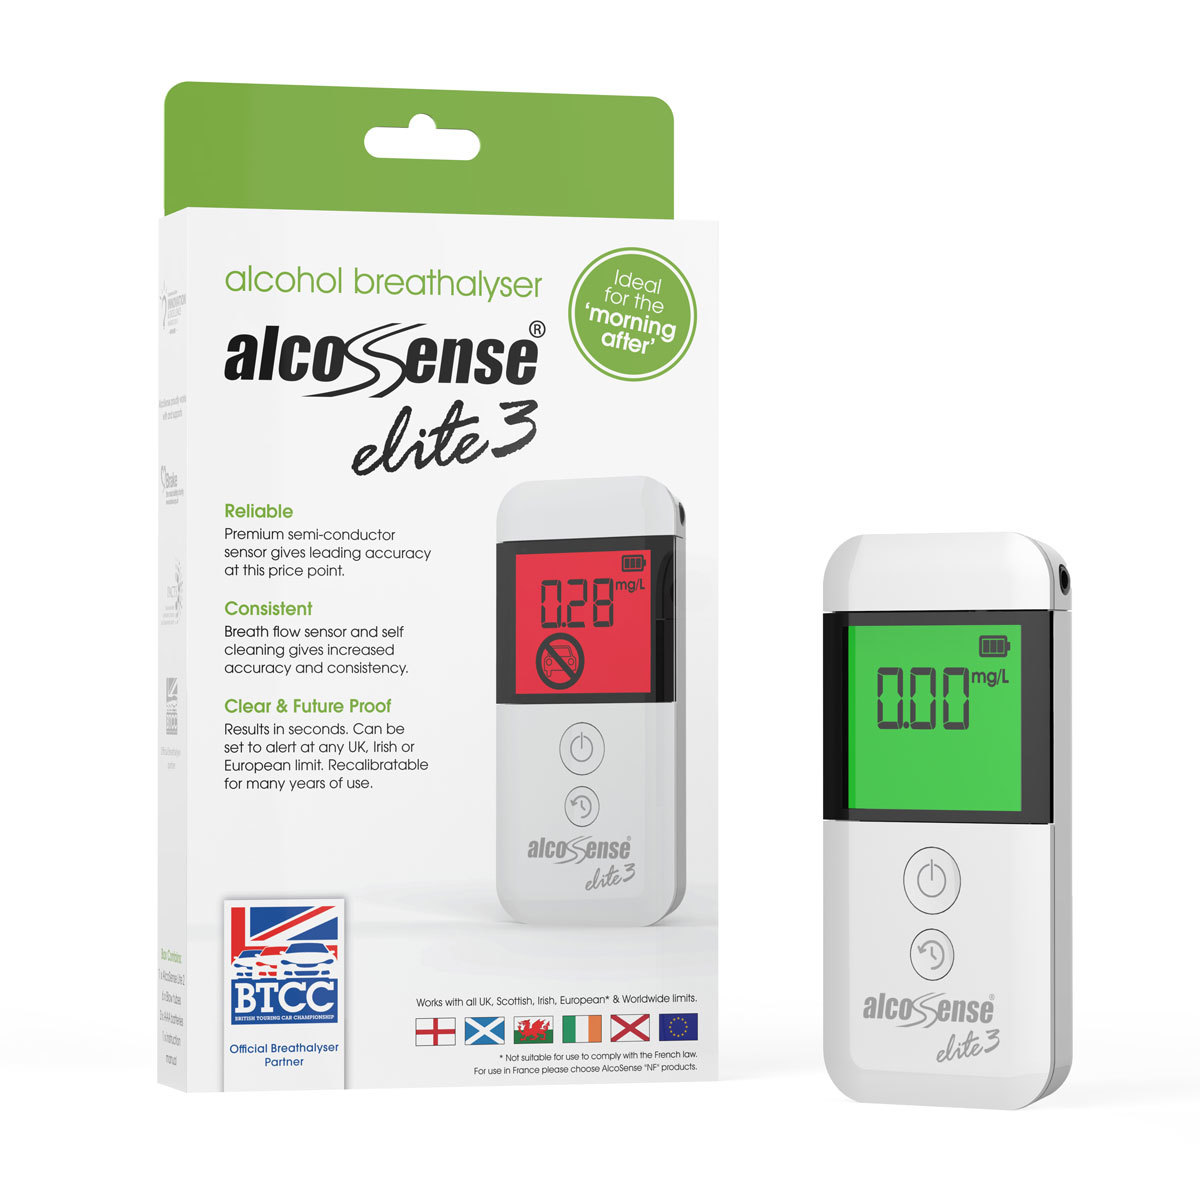 AlcoSense Elite 3 Electronic Breathalyser with Pack of 20 Blow Tubes